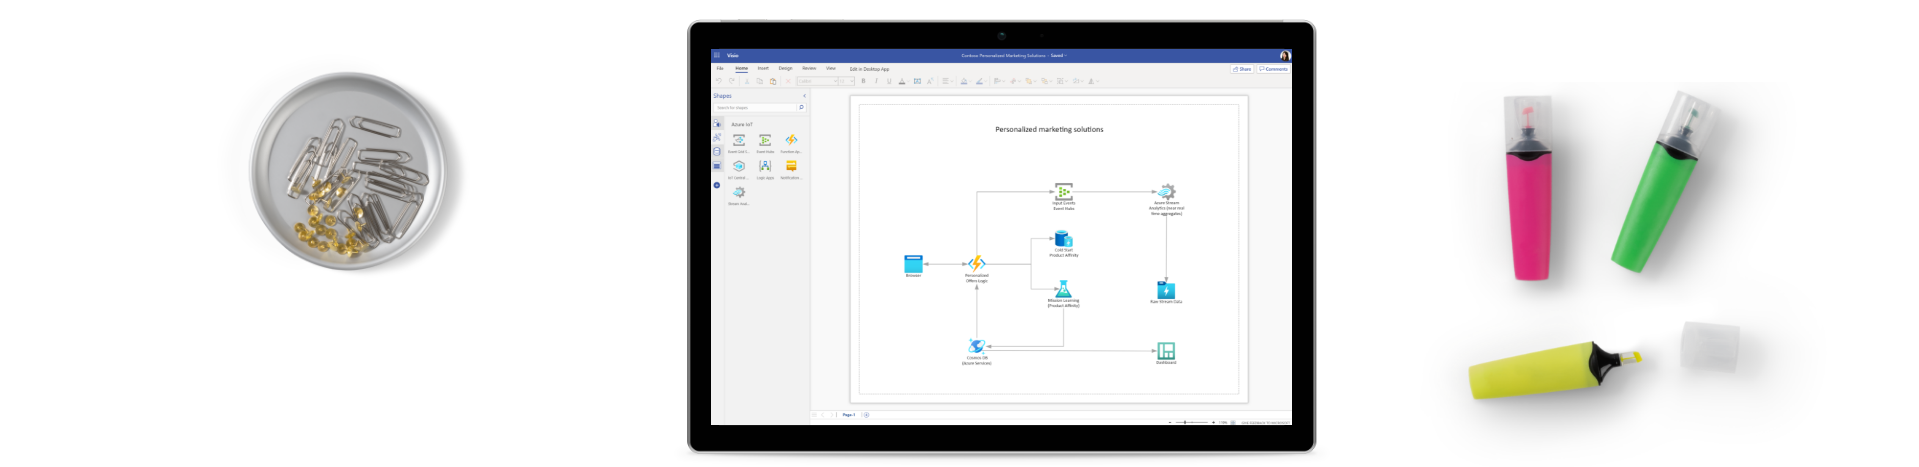 A few highlighters, paperclips and a tablet device showing network diagrams in Microsoft Azure.